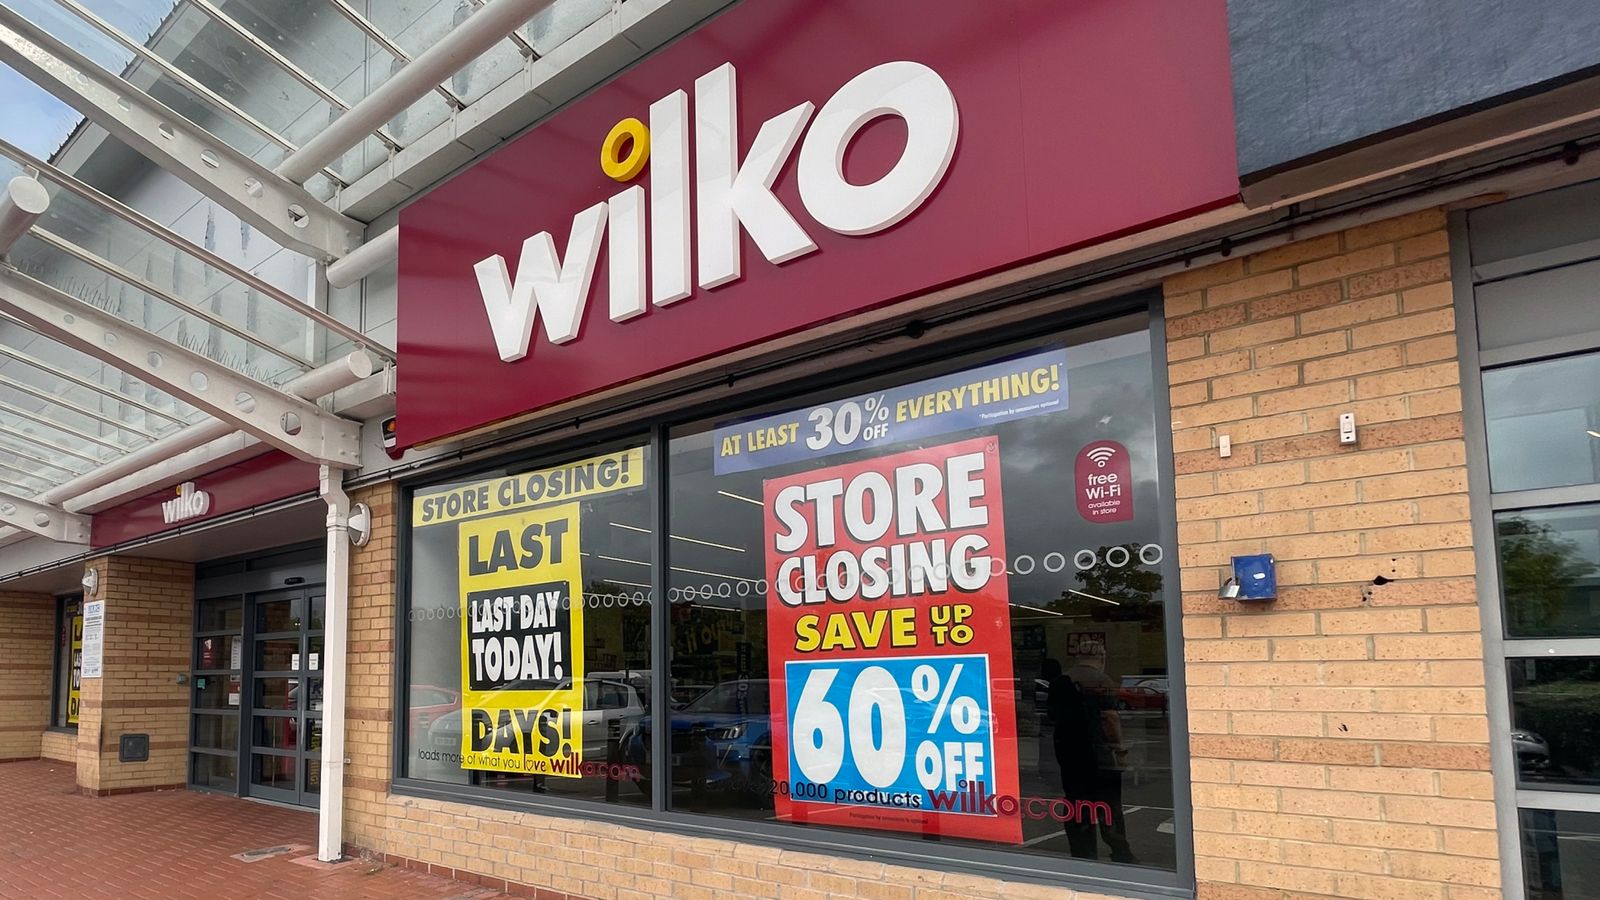 Wilko Latest News: Updates on Store Closures and Future Plans